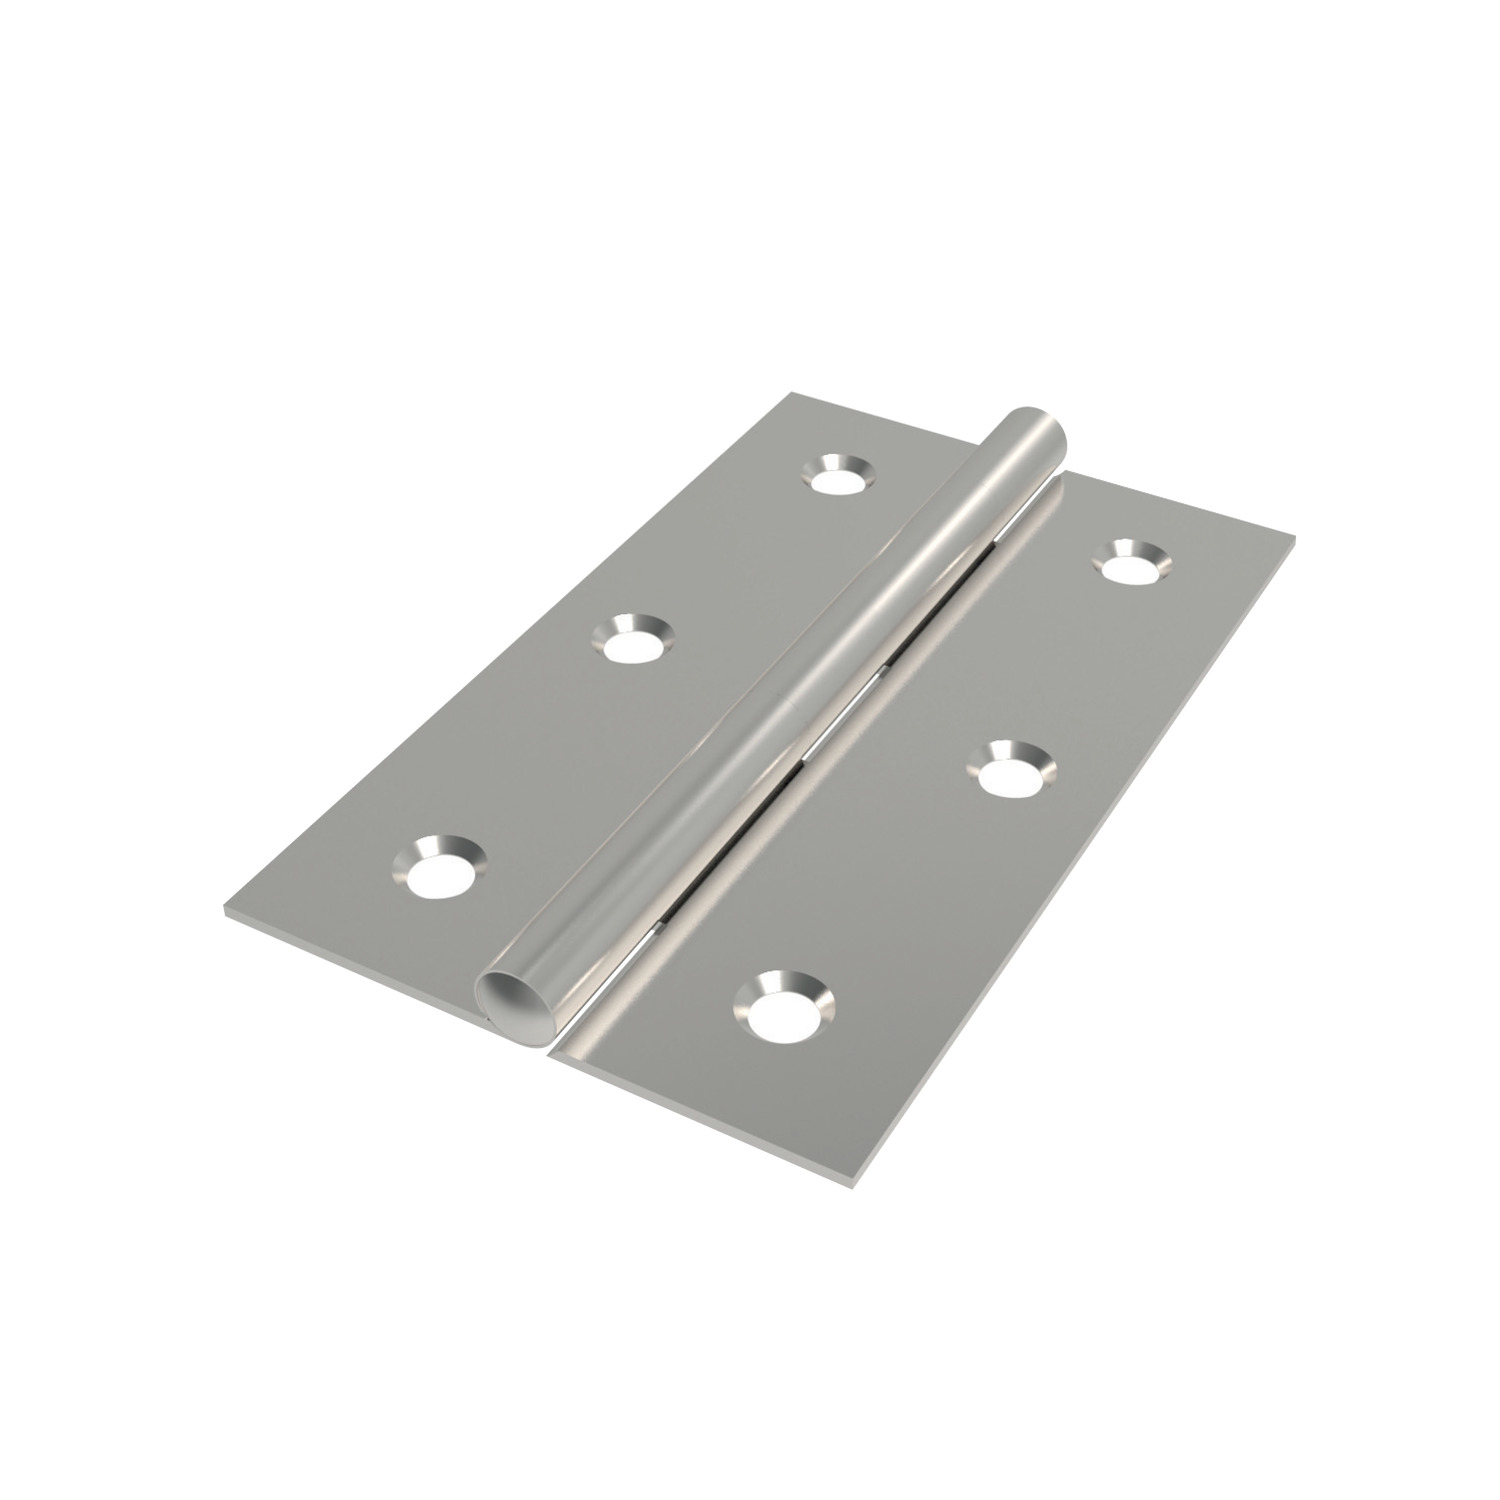 Product S0720, Surface Mount - Leaf Hinges screw mount - stainless steel / 